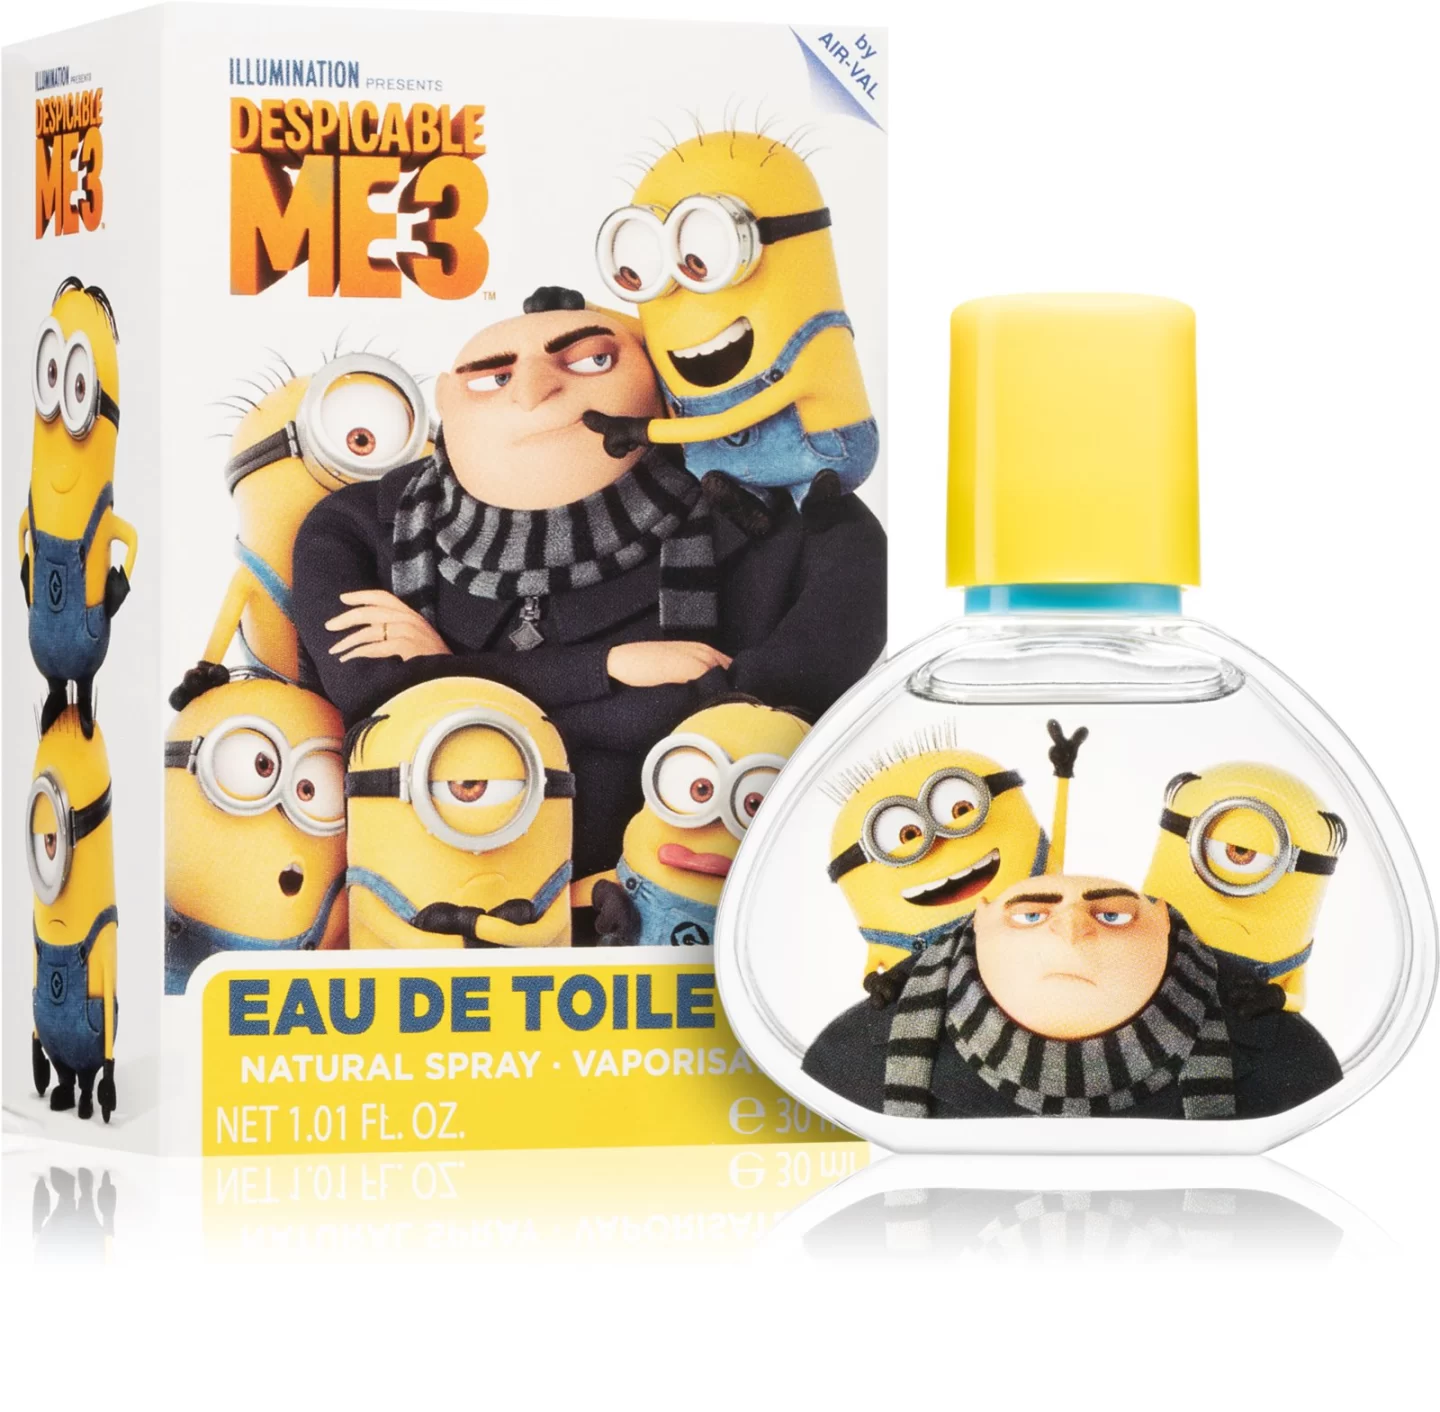 Minions Perfume Fragrance
Best Perfumes For Kids